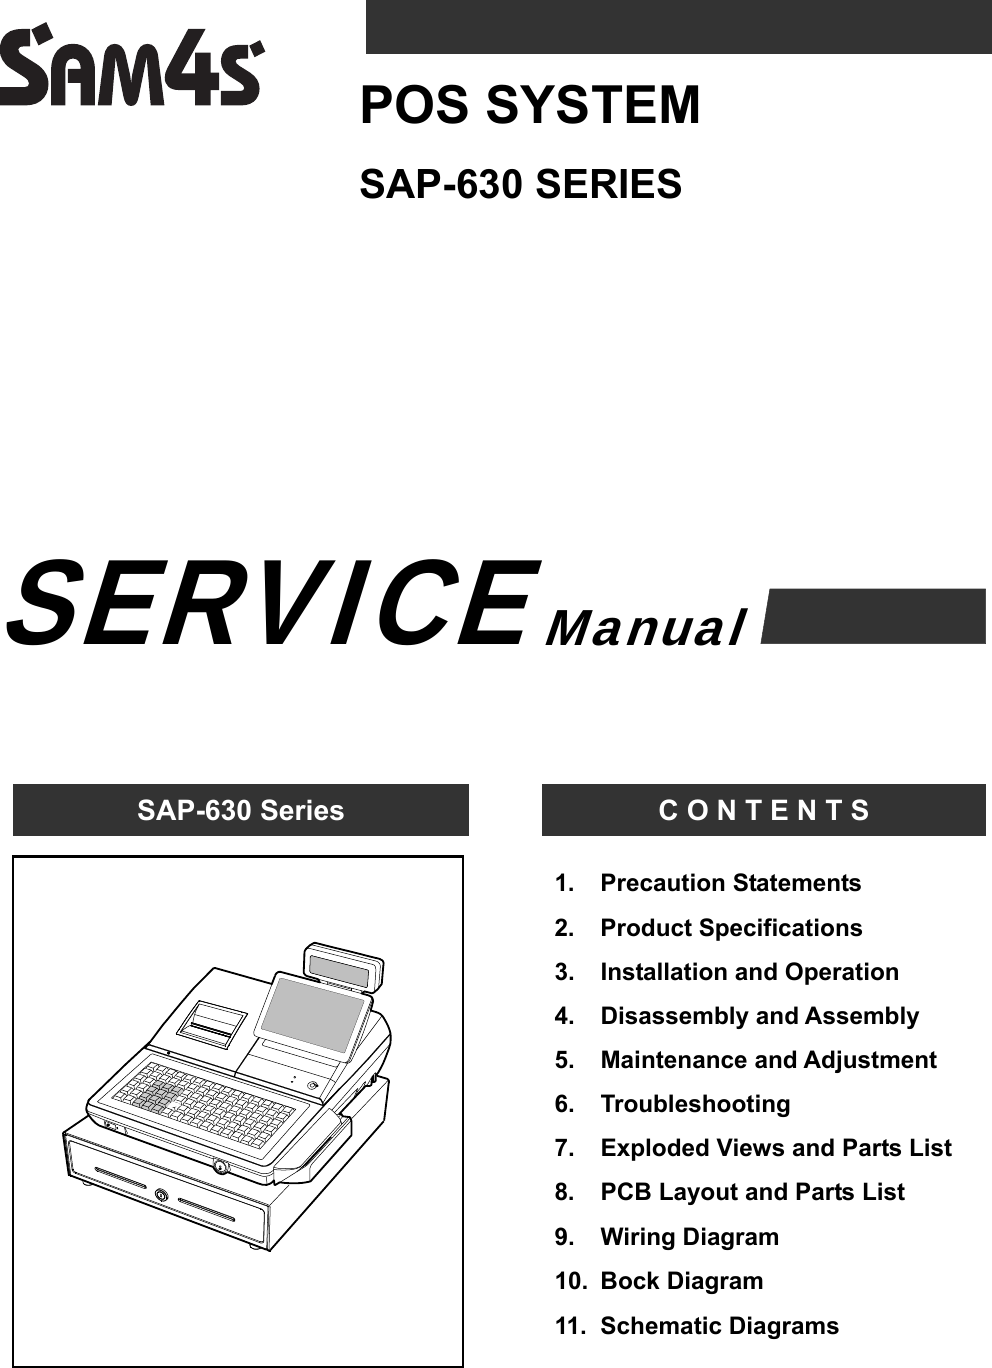                         SAP-630 Series  C O N T E N T S SAP-630 SERIES POS SYSTEM Manual 1.   Precaution Statements 2.   Product Specifications 3.   Installation and Operation 4.   Disassembly and Assembly 5.   Maintenance and Adjustment 6.   Troubleshooting 7.   Exploded Views and Parts List 8.    PCB Layout and Parts List 9.    Wiring Diagram 10.  Bock Diagram 11.  Schematic Diagrams  SERVICE 